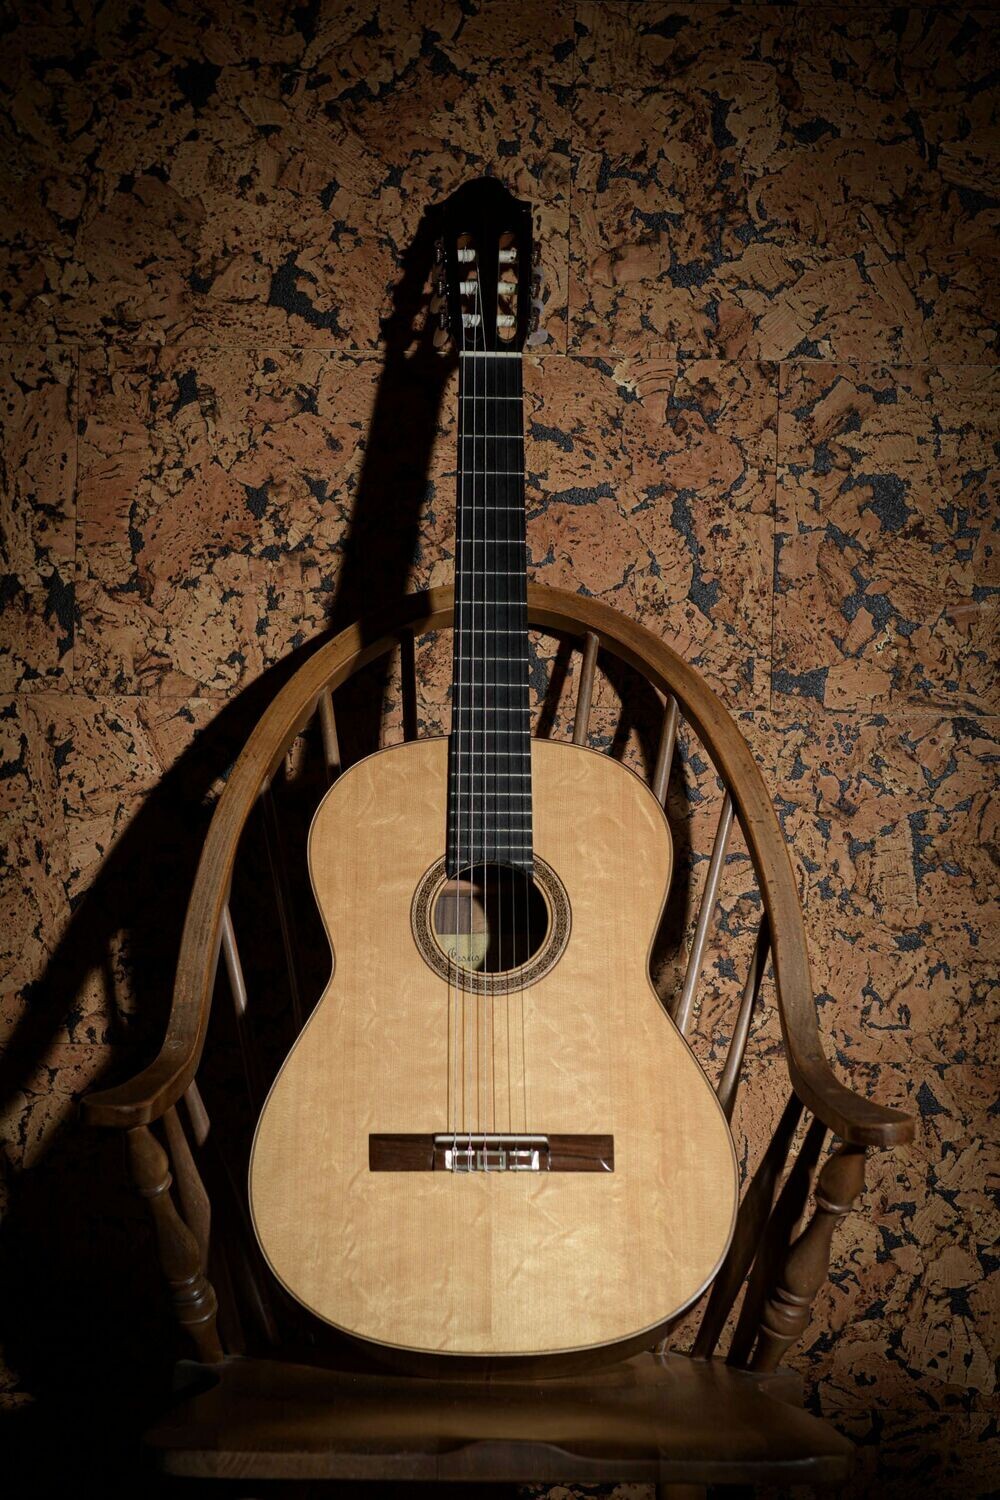 Jesus Bellido Especial | Bearclaw spruce / Indian Rosewood 2001 Flamenco and classical concert guitar